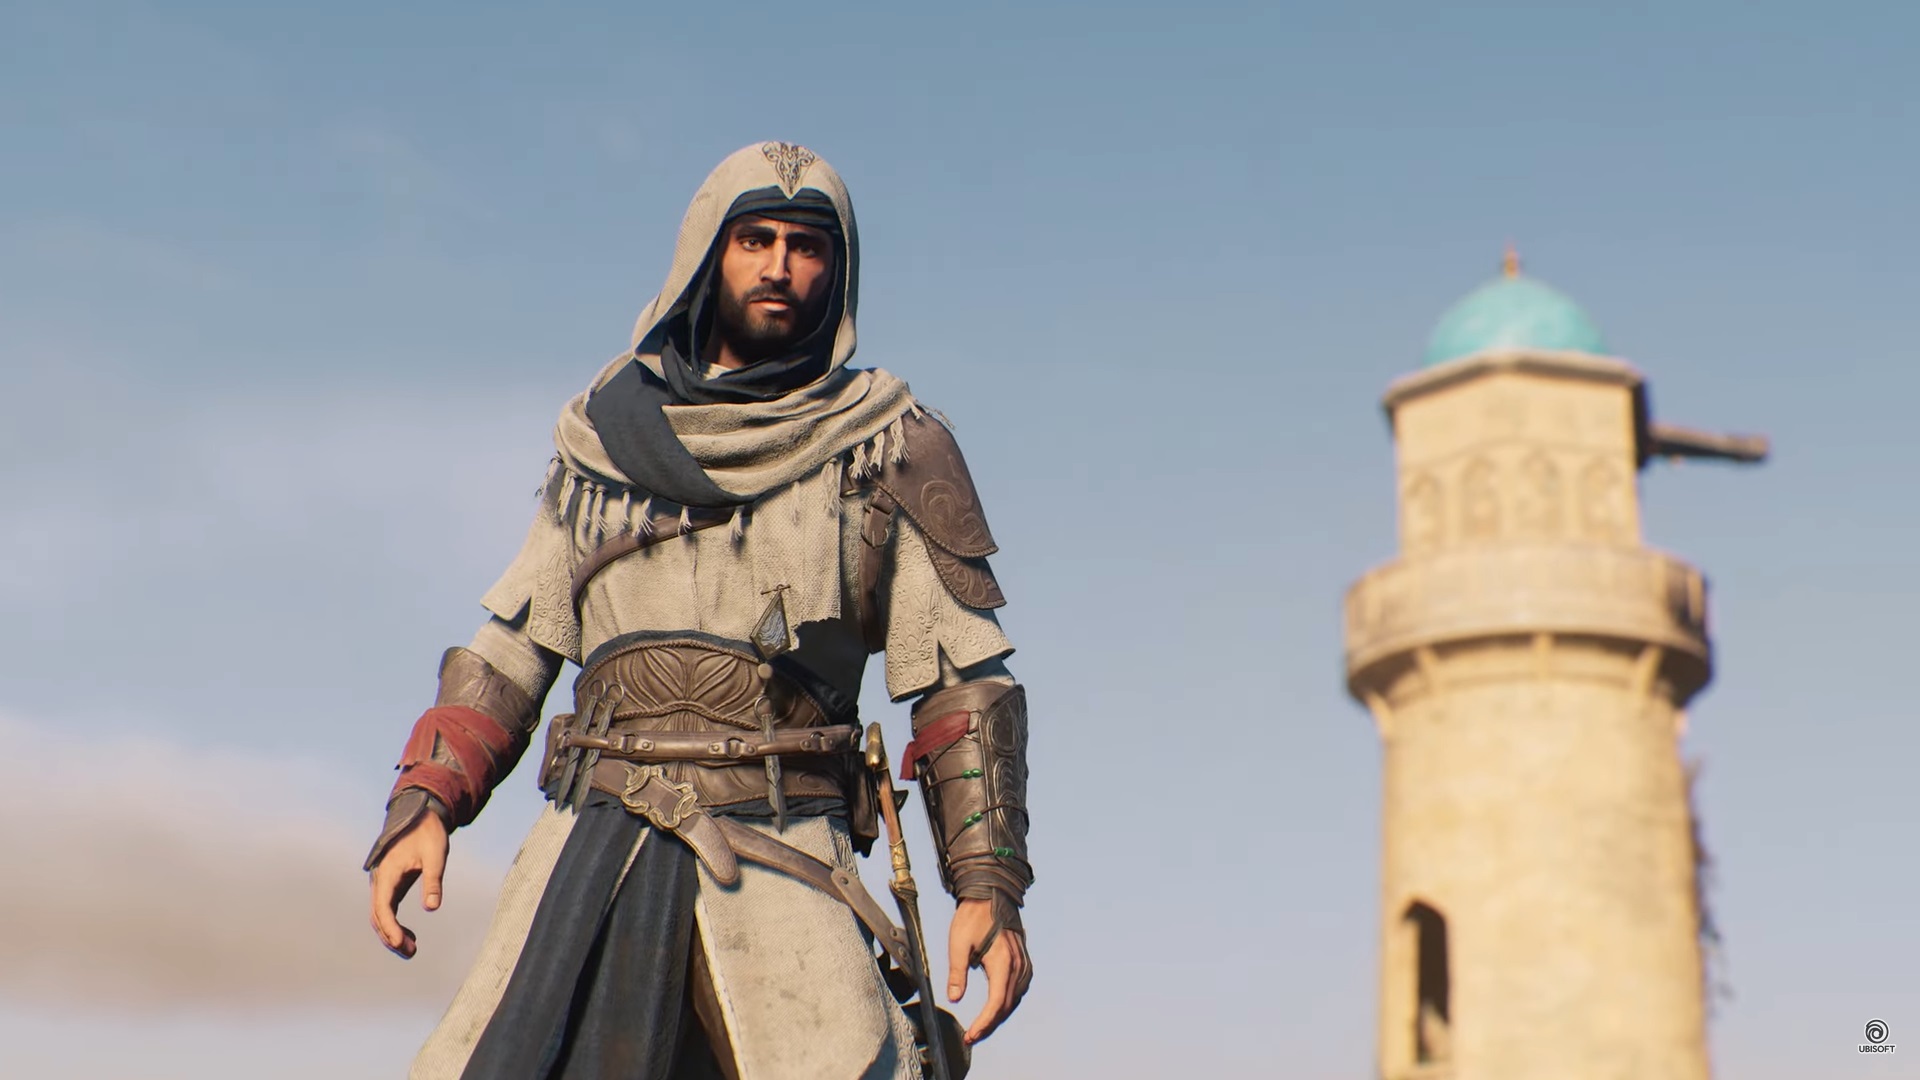 Assassin's Creed Mirage Review Roundup- Return To Classic Formula